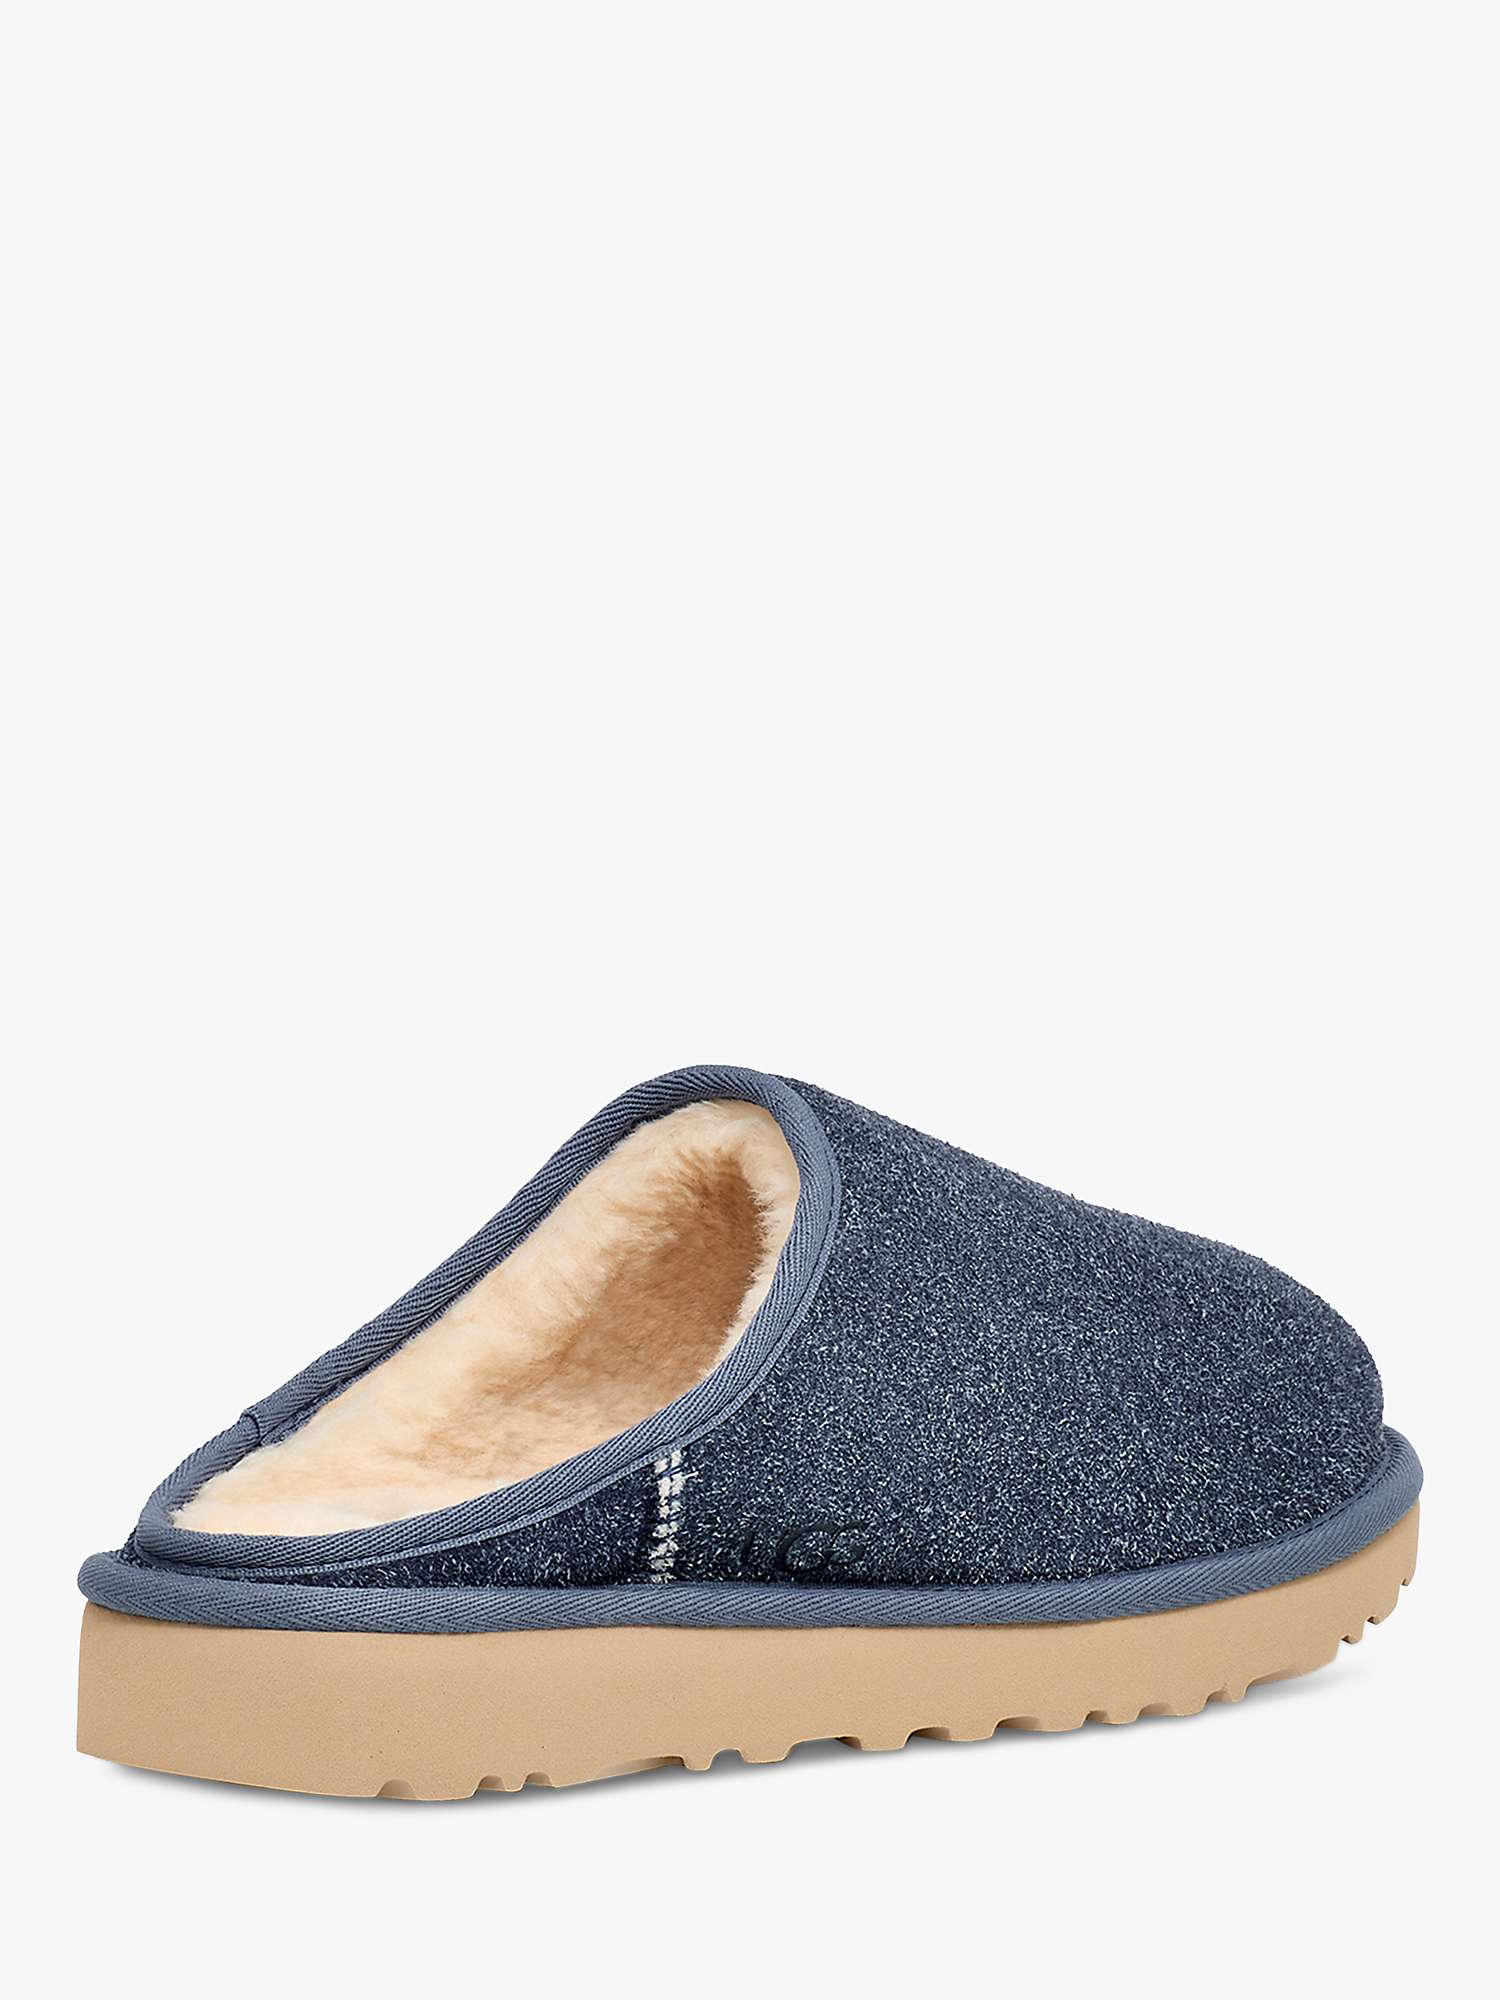 Buy UGG Classic Slip On Shaggy Slippers, Blue Online at johnlewis.com